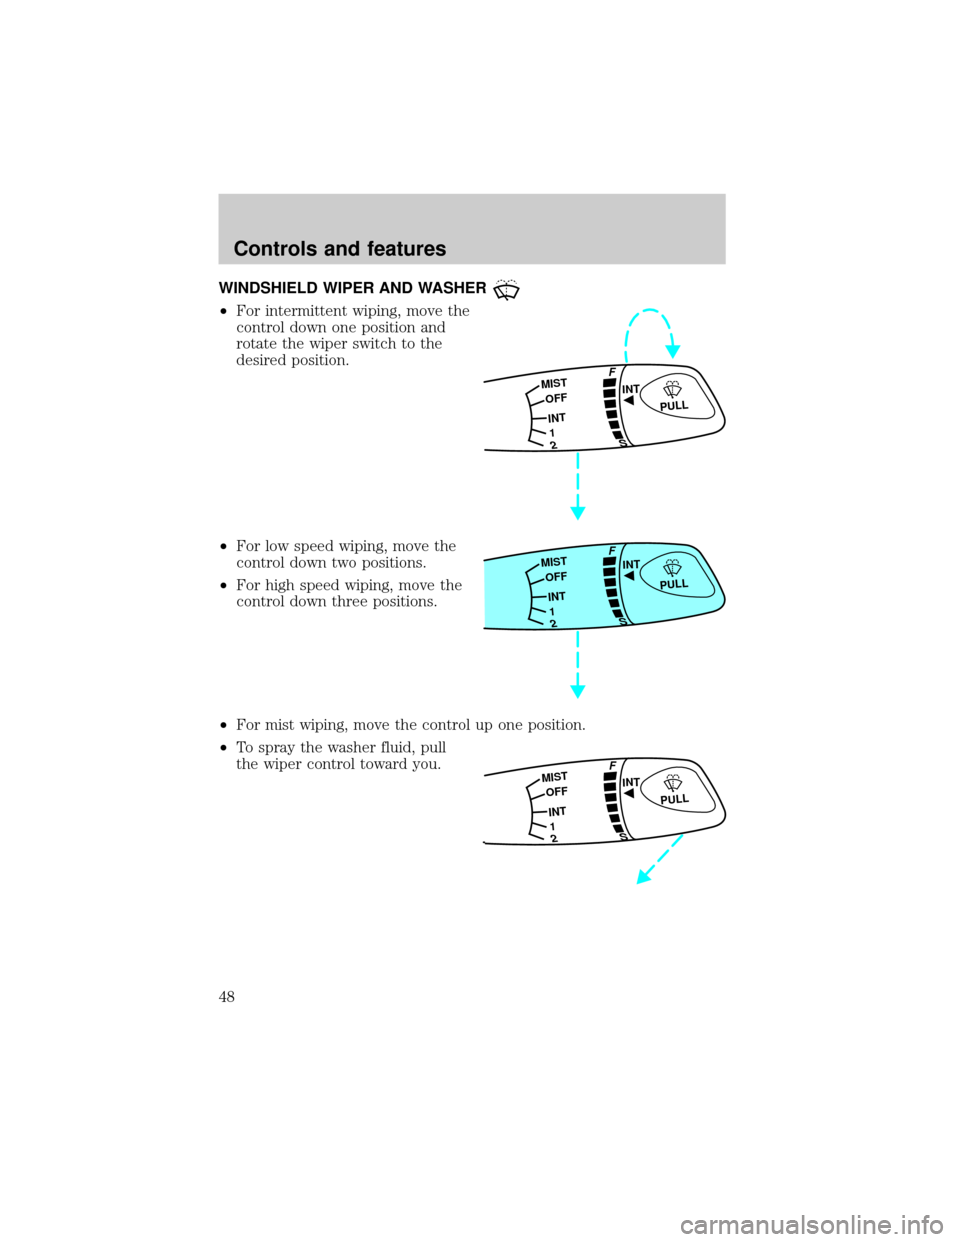 FORD ESCORT 2000 7.G Service Manual WINDSHIELD WIPER AND WASHER
²For intermittent wiping, move the
control down one position and
rotate the wiper switch to the
desired position.
²For low speed wiping, move the
control down two positio